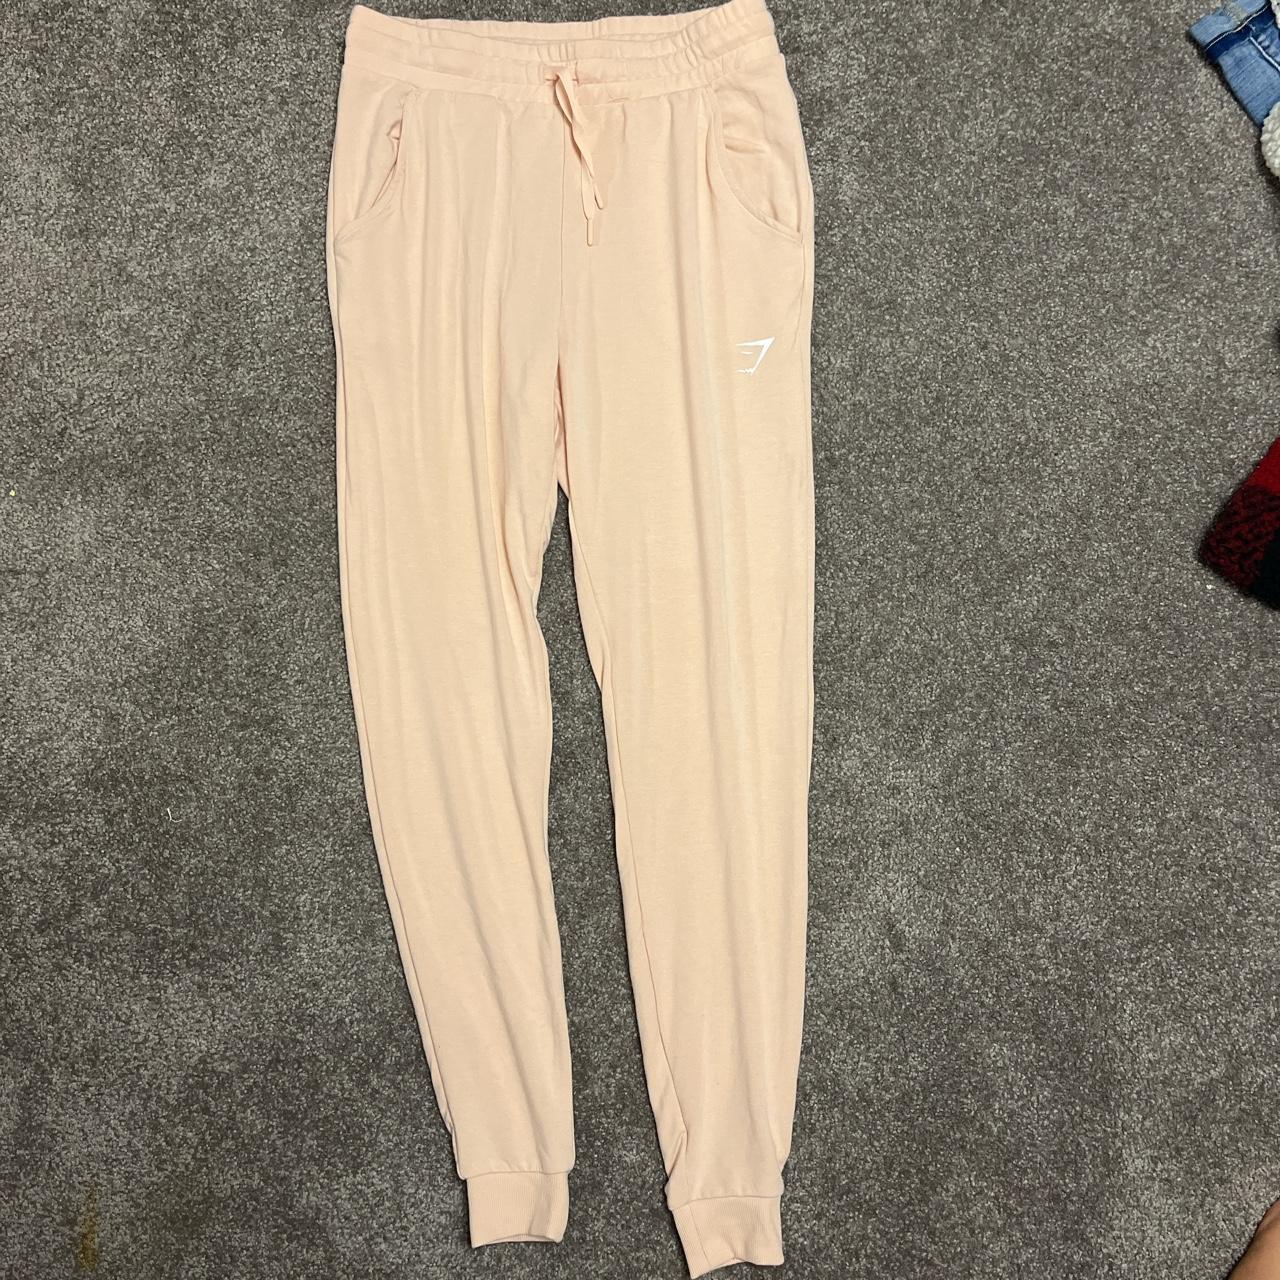 Gymshark joggers, size small, never worn they are a - Depop